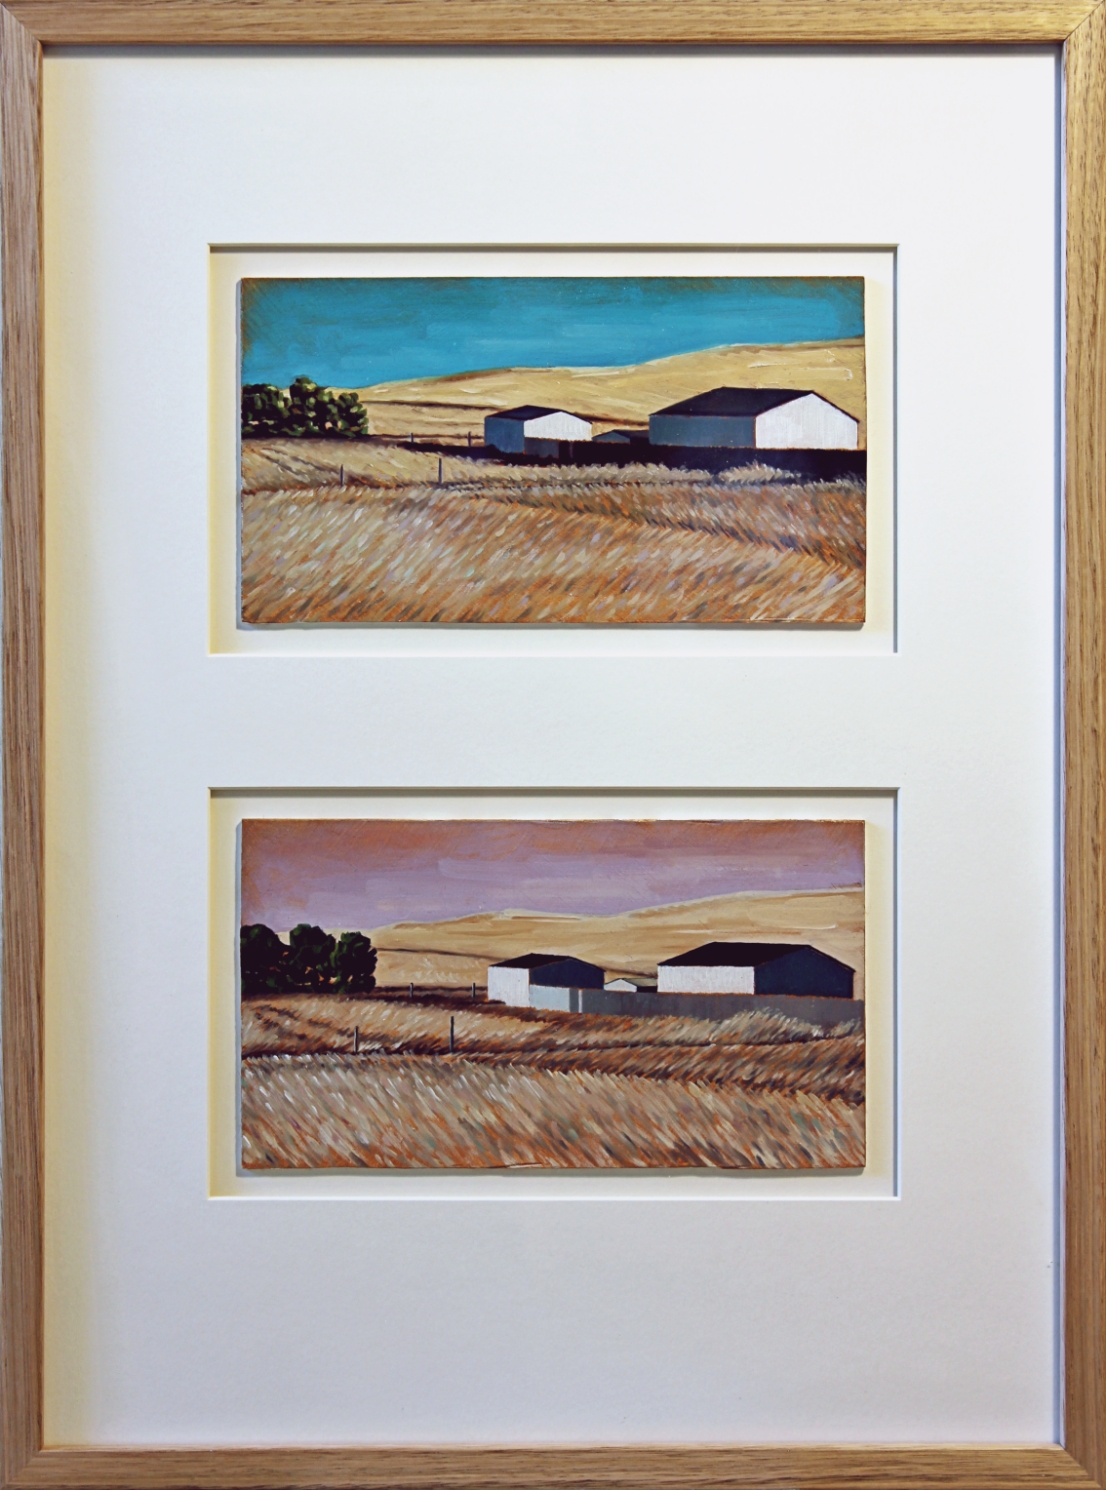 Ardrossan Wheat, 7am to 7pm by Oliver Shepherd | Lethbridge Landscape Prize 2022 Finalists | Lethbridge Gallery